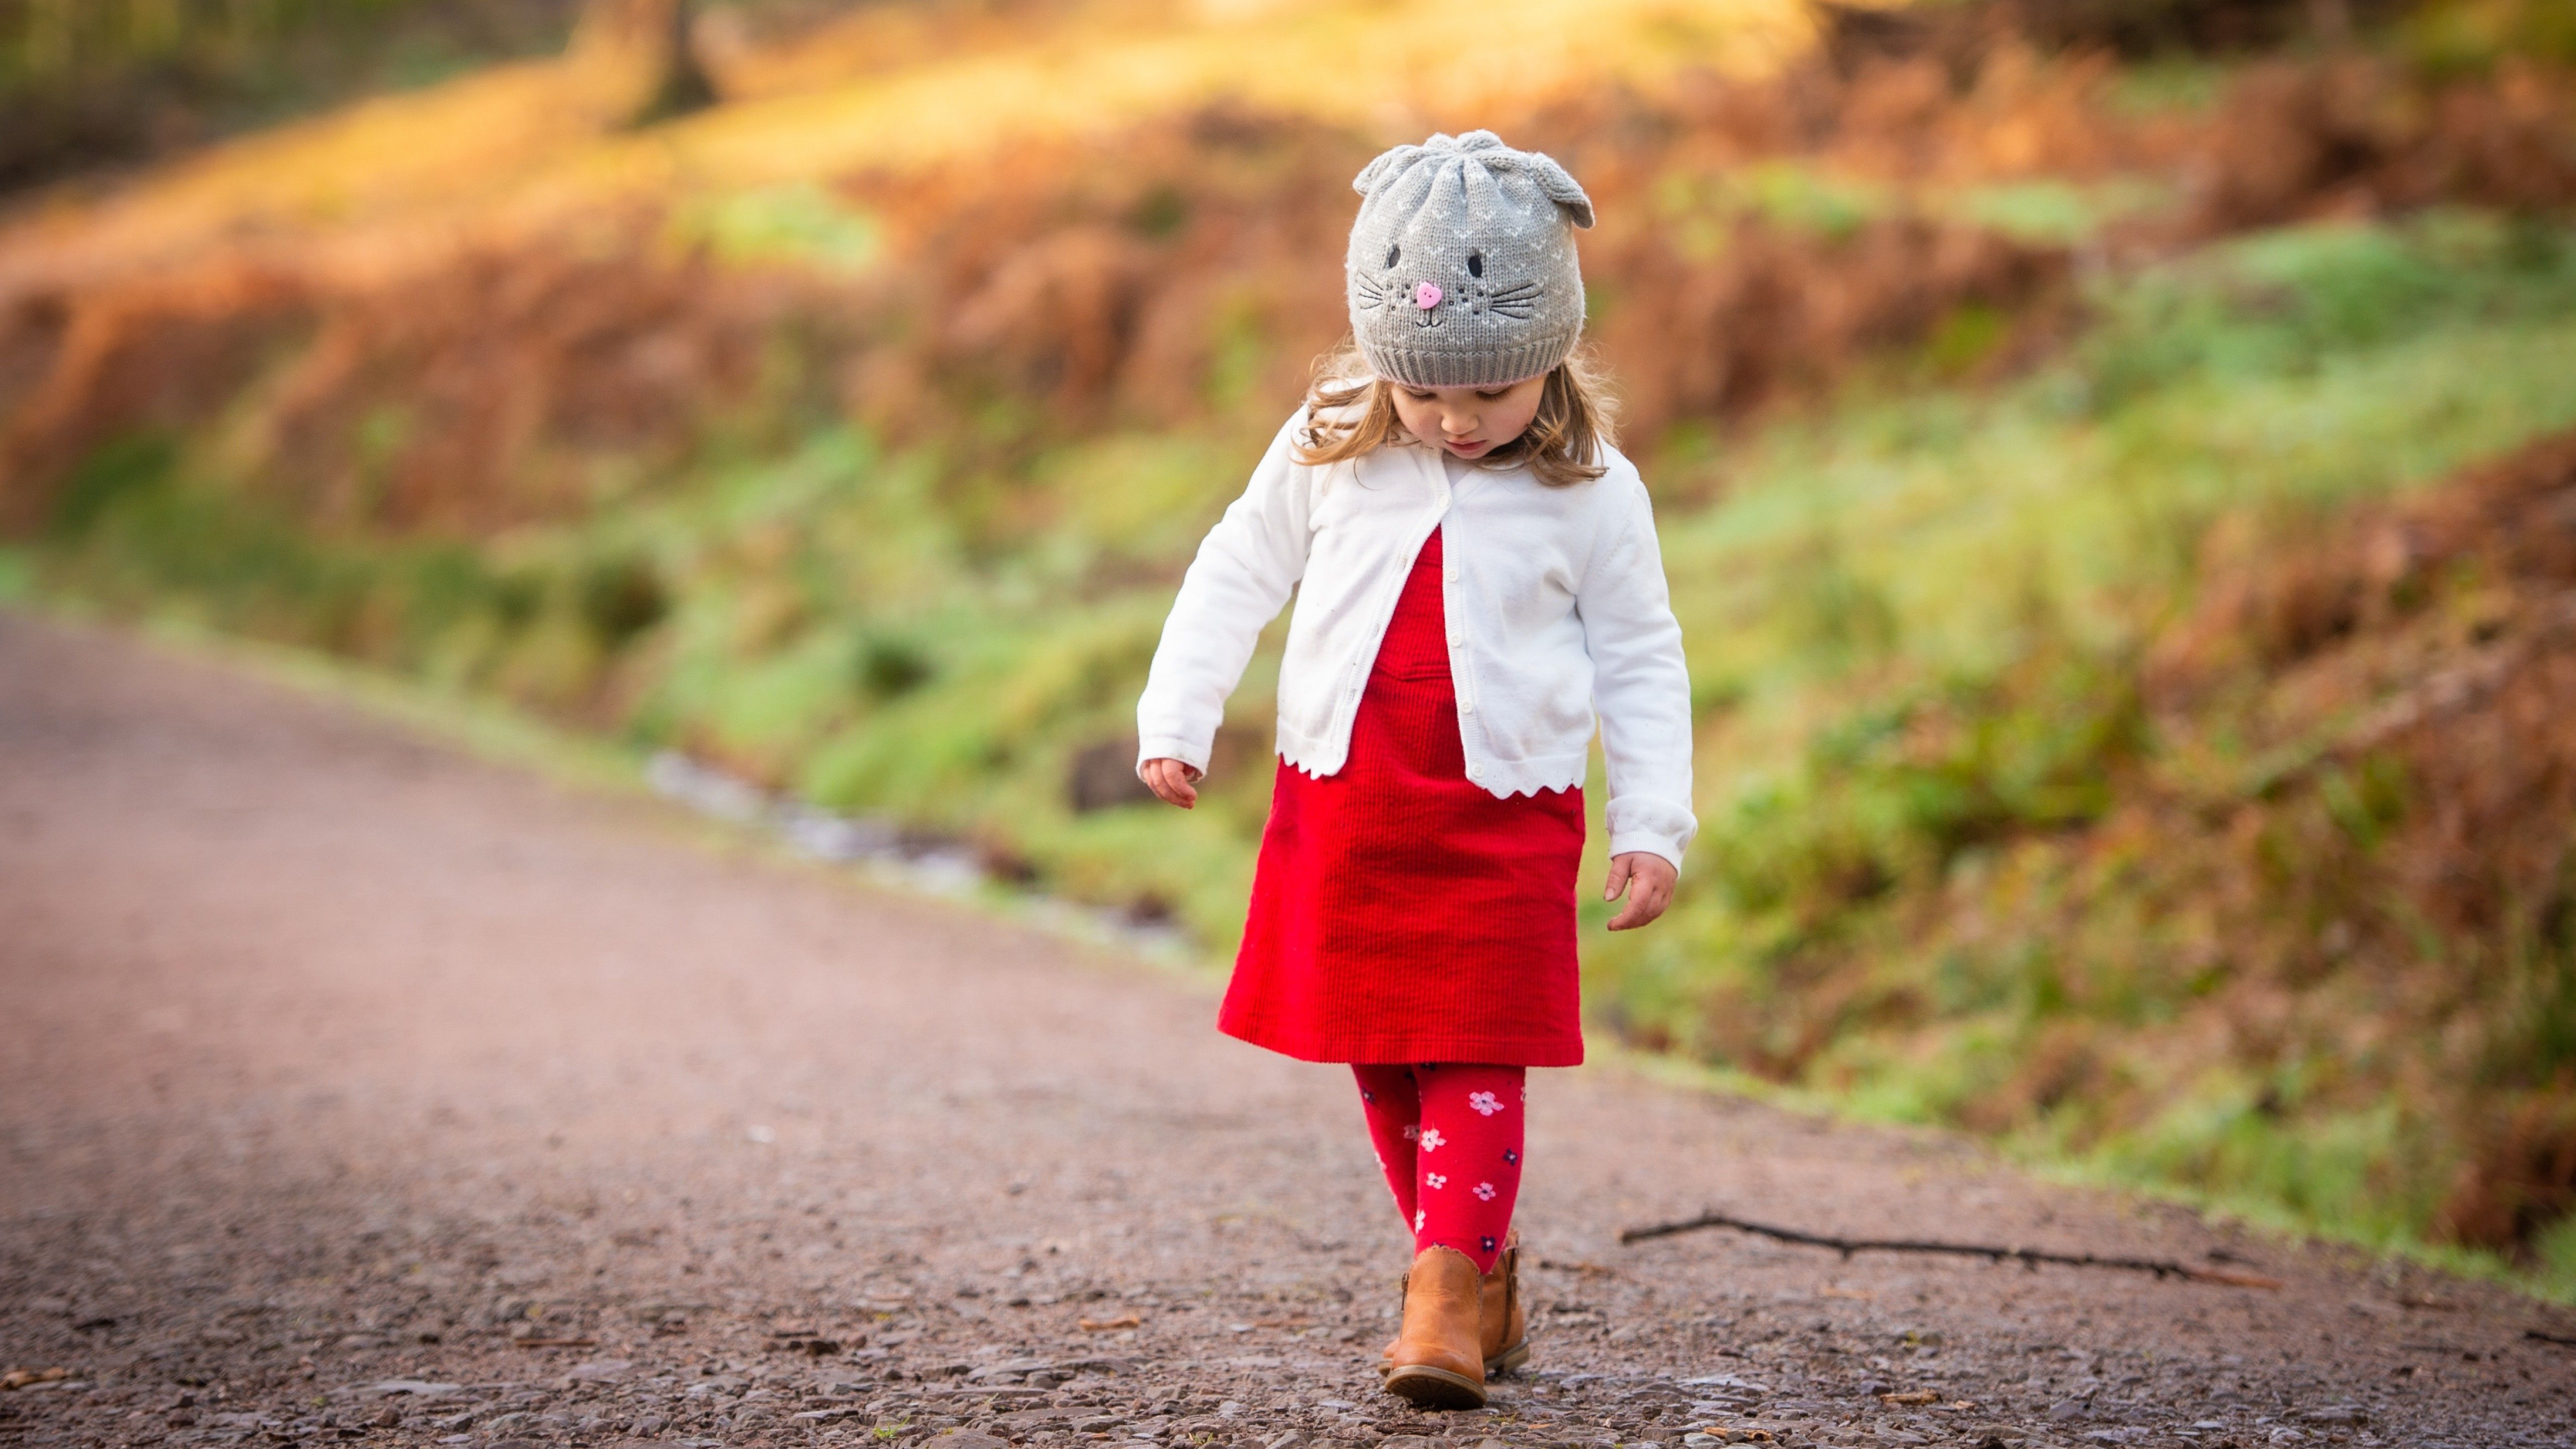 Cute girl 4K Wallpaper, Child, Adorable, Road, Red dress, Winter, Cold, Cute